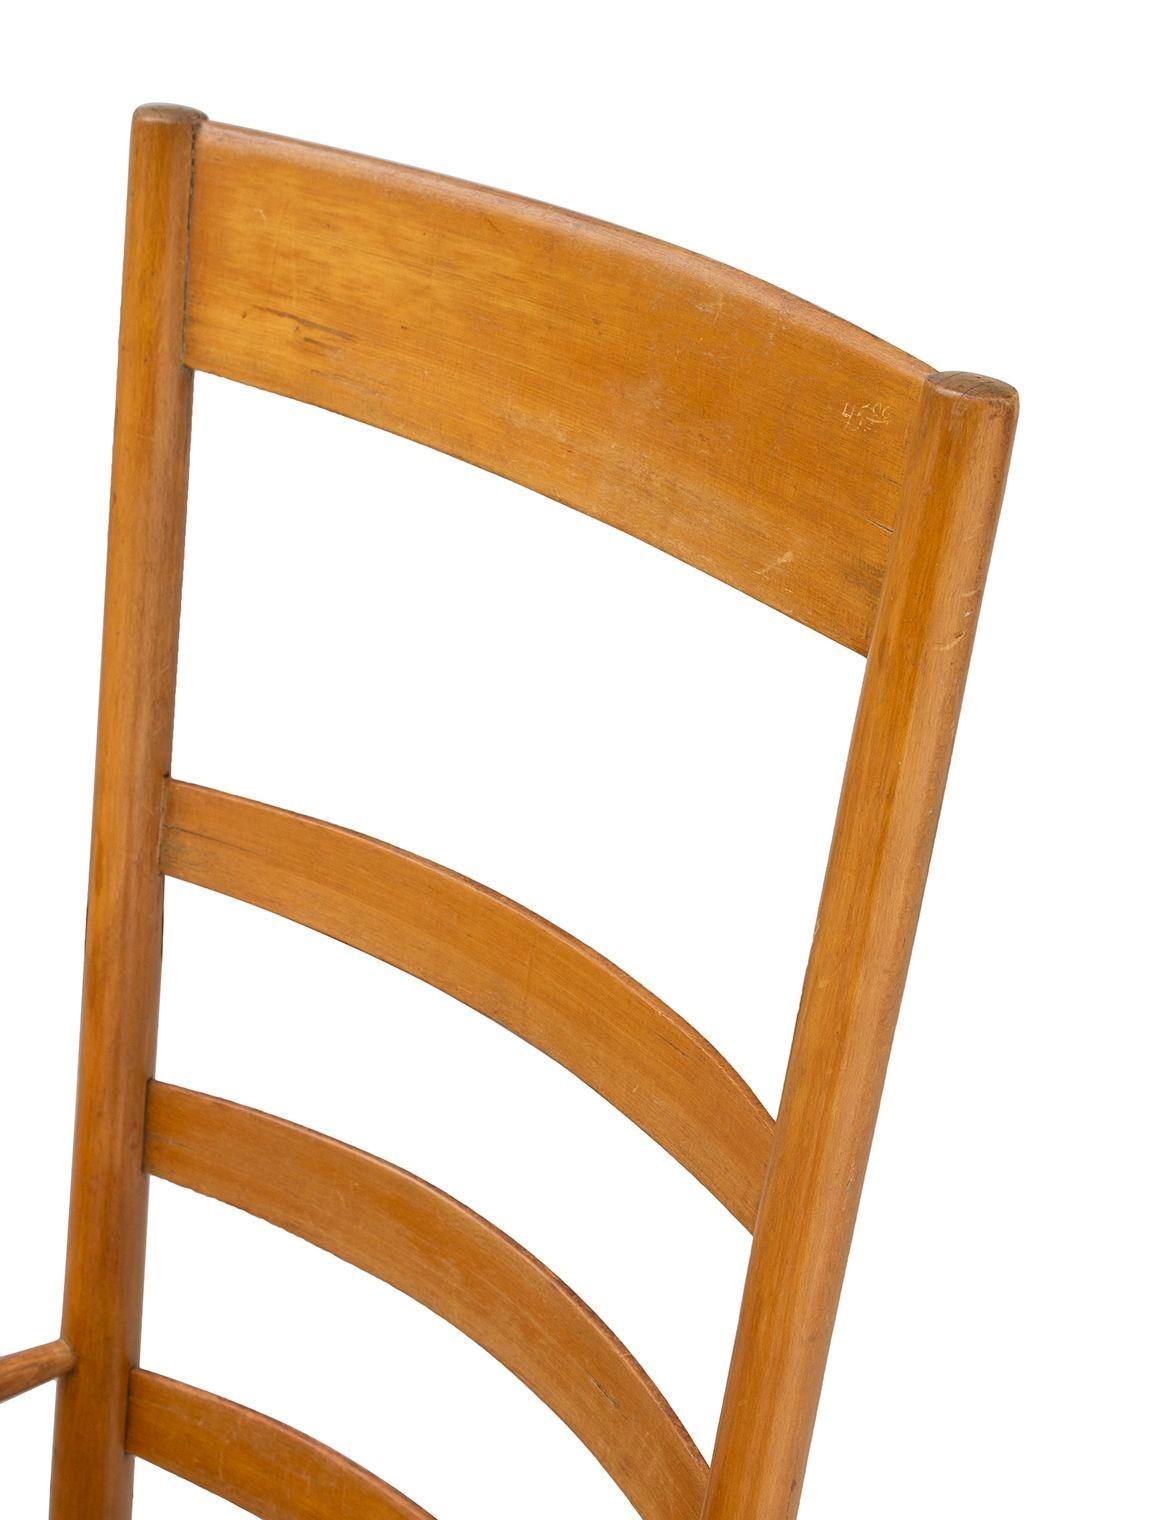 USA, 1940s
Handmade Birch Rocker with Woven Rush Seat. The details on this piece are subtle but beautiful. The curving back varies from ladder to ladder, the upright arm supports have a gently curving profile. The feel is classic Americana. Will add